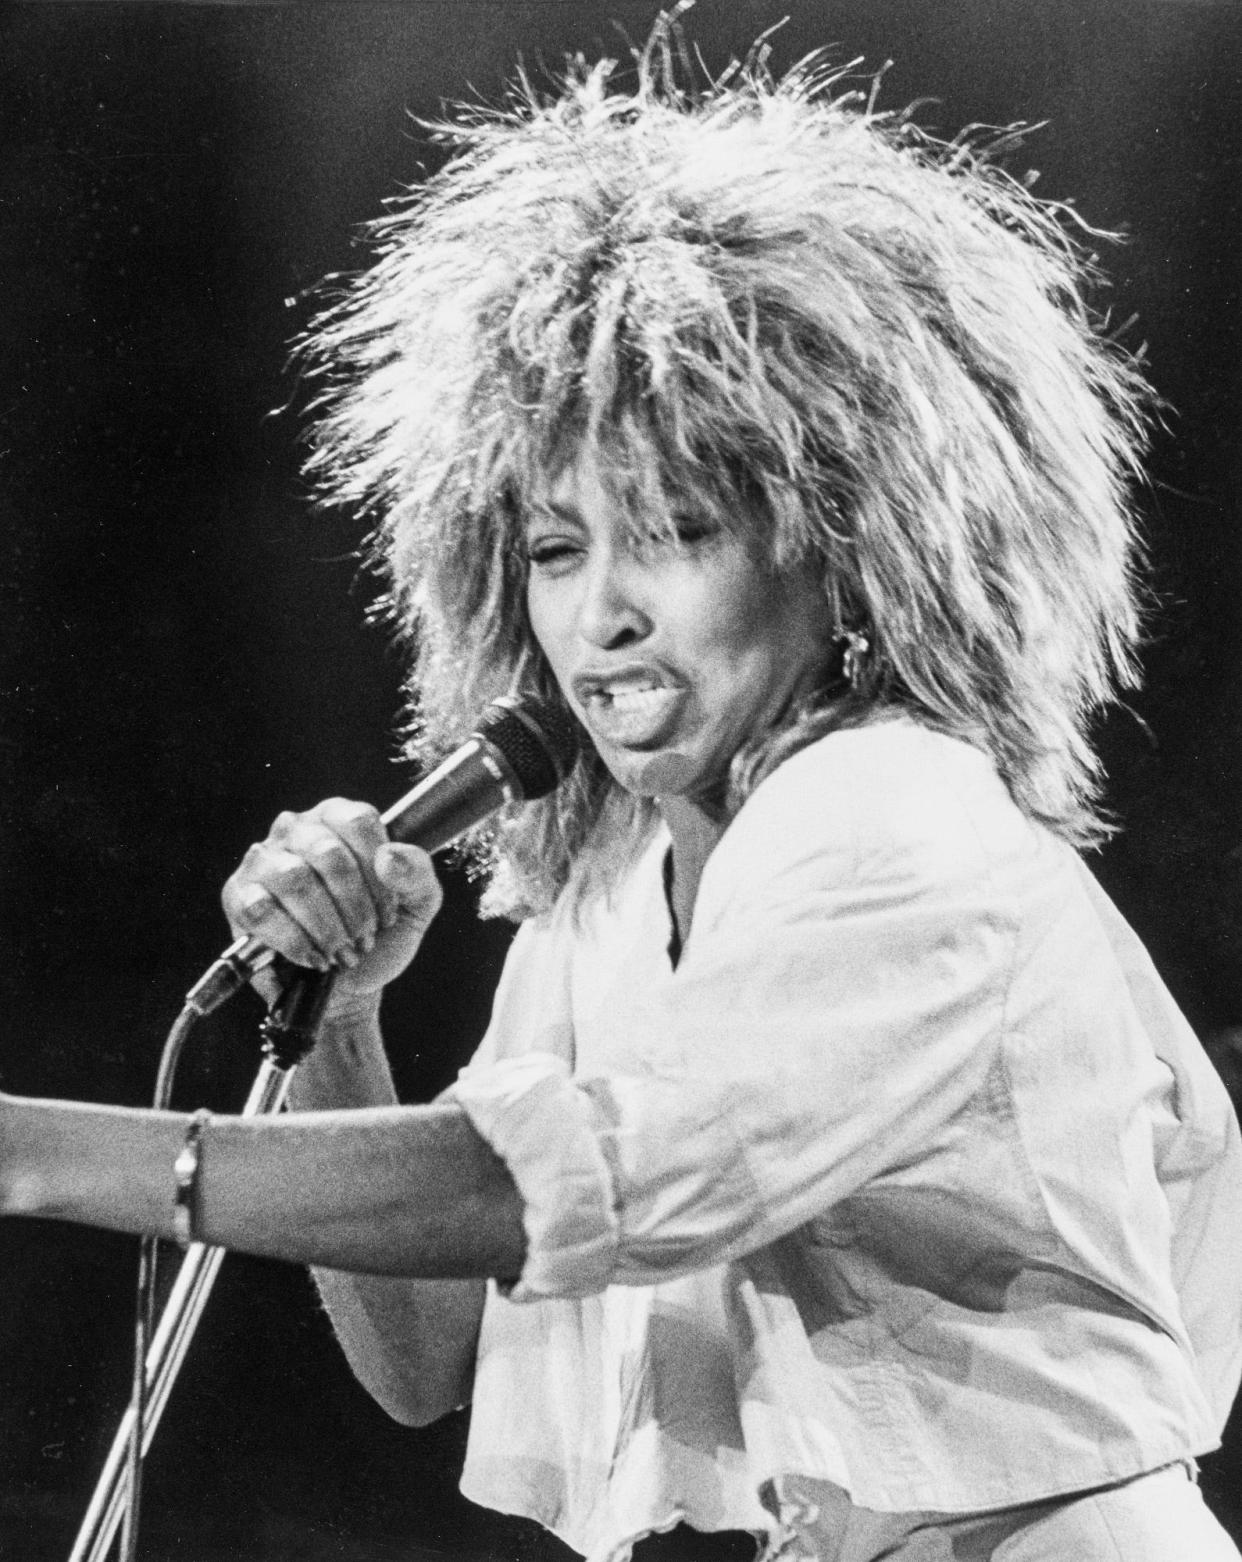 Tina Turner performs at the Centrum July 21, 1985.